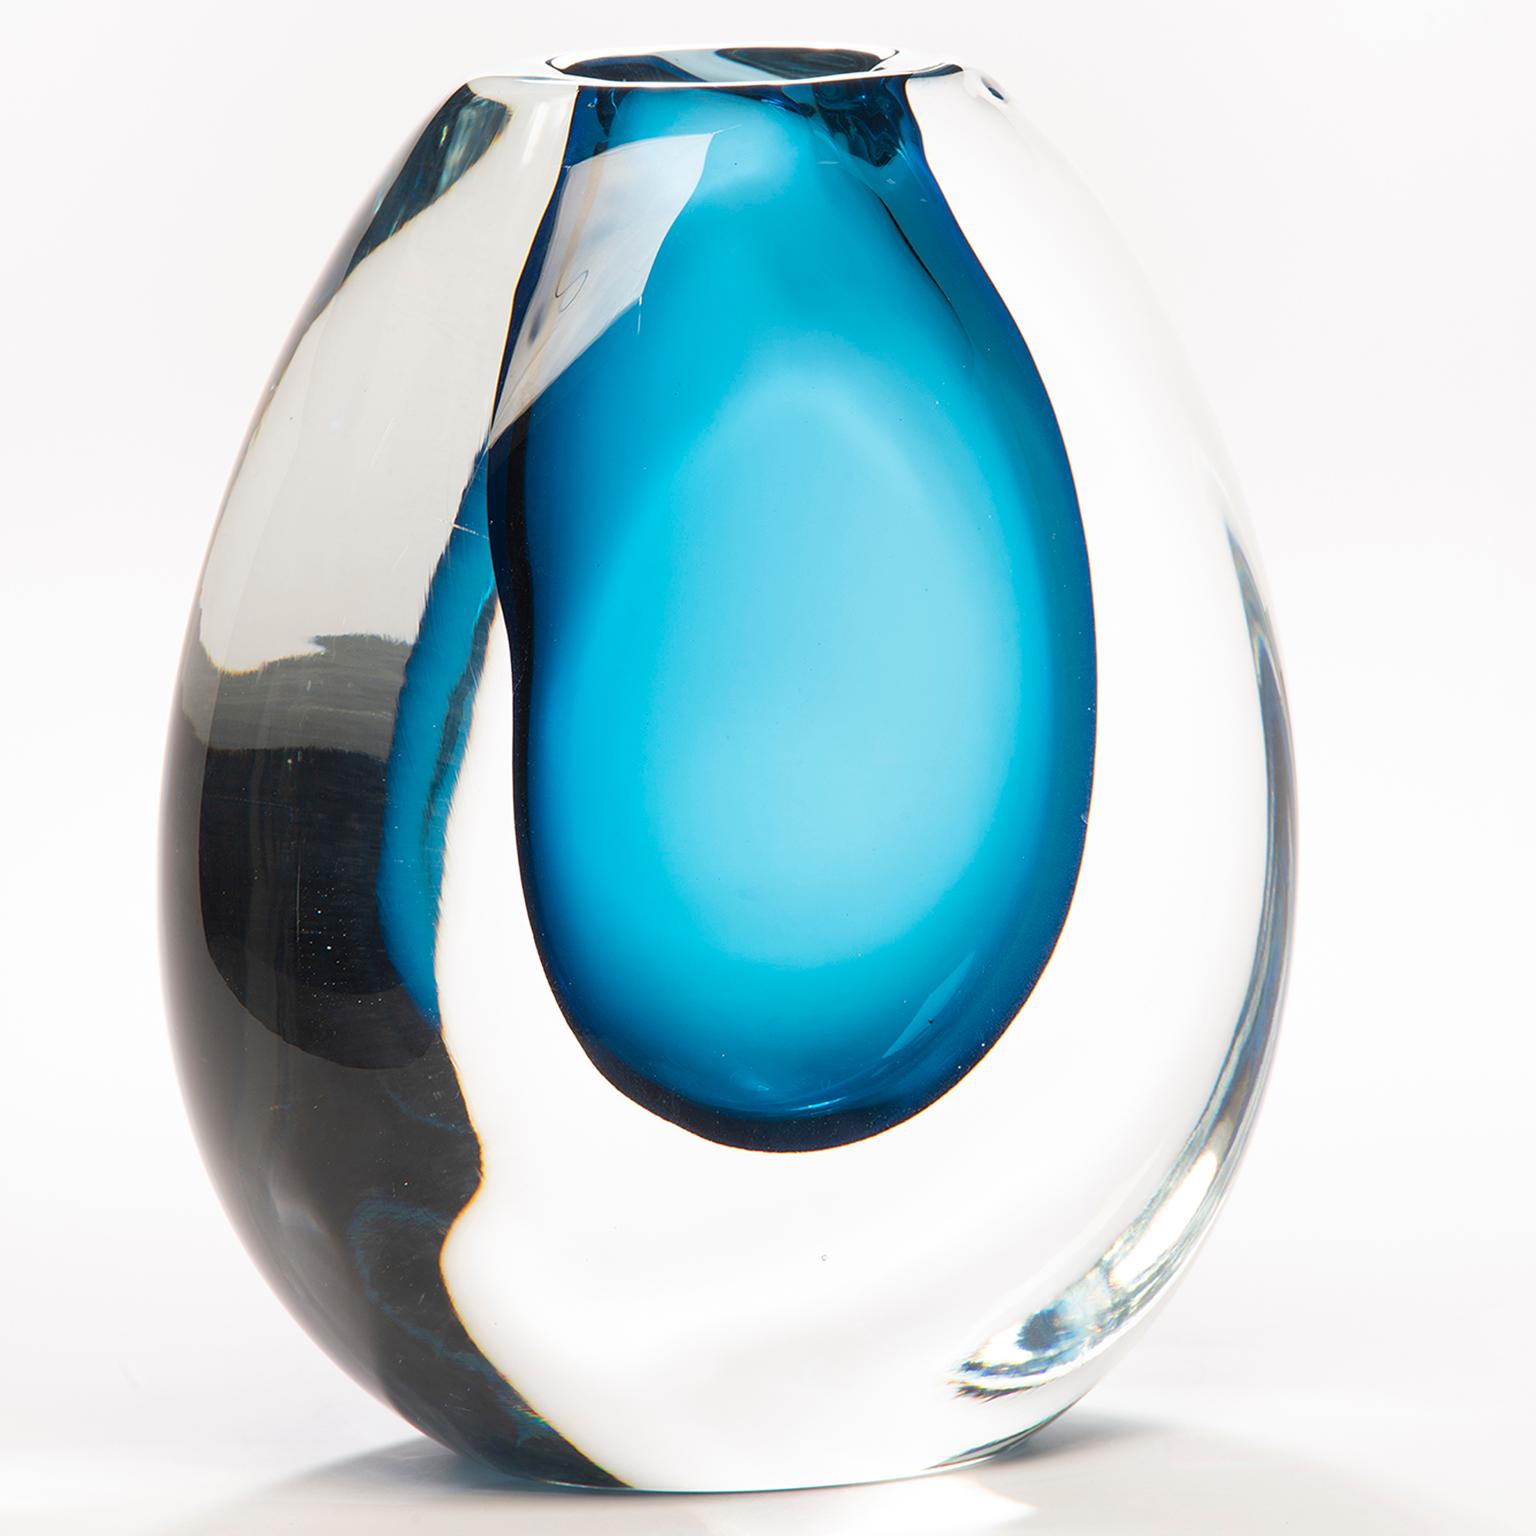 Contemporary Tall Sommerso Style Blue Art Glass Vase